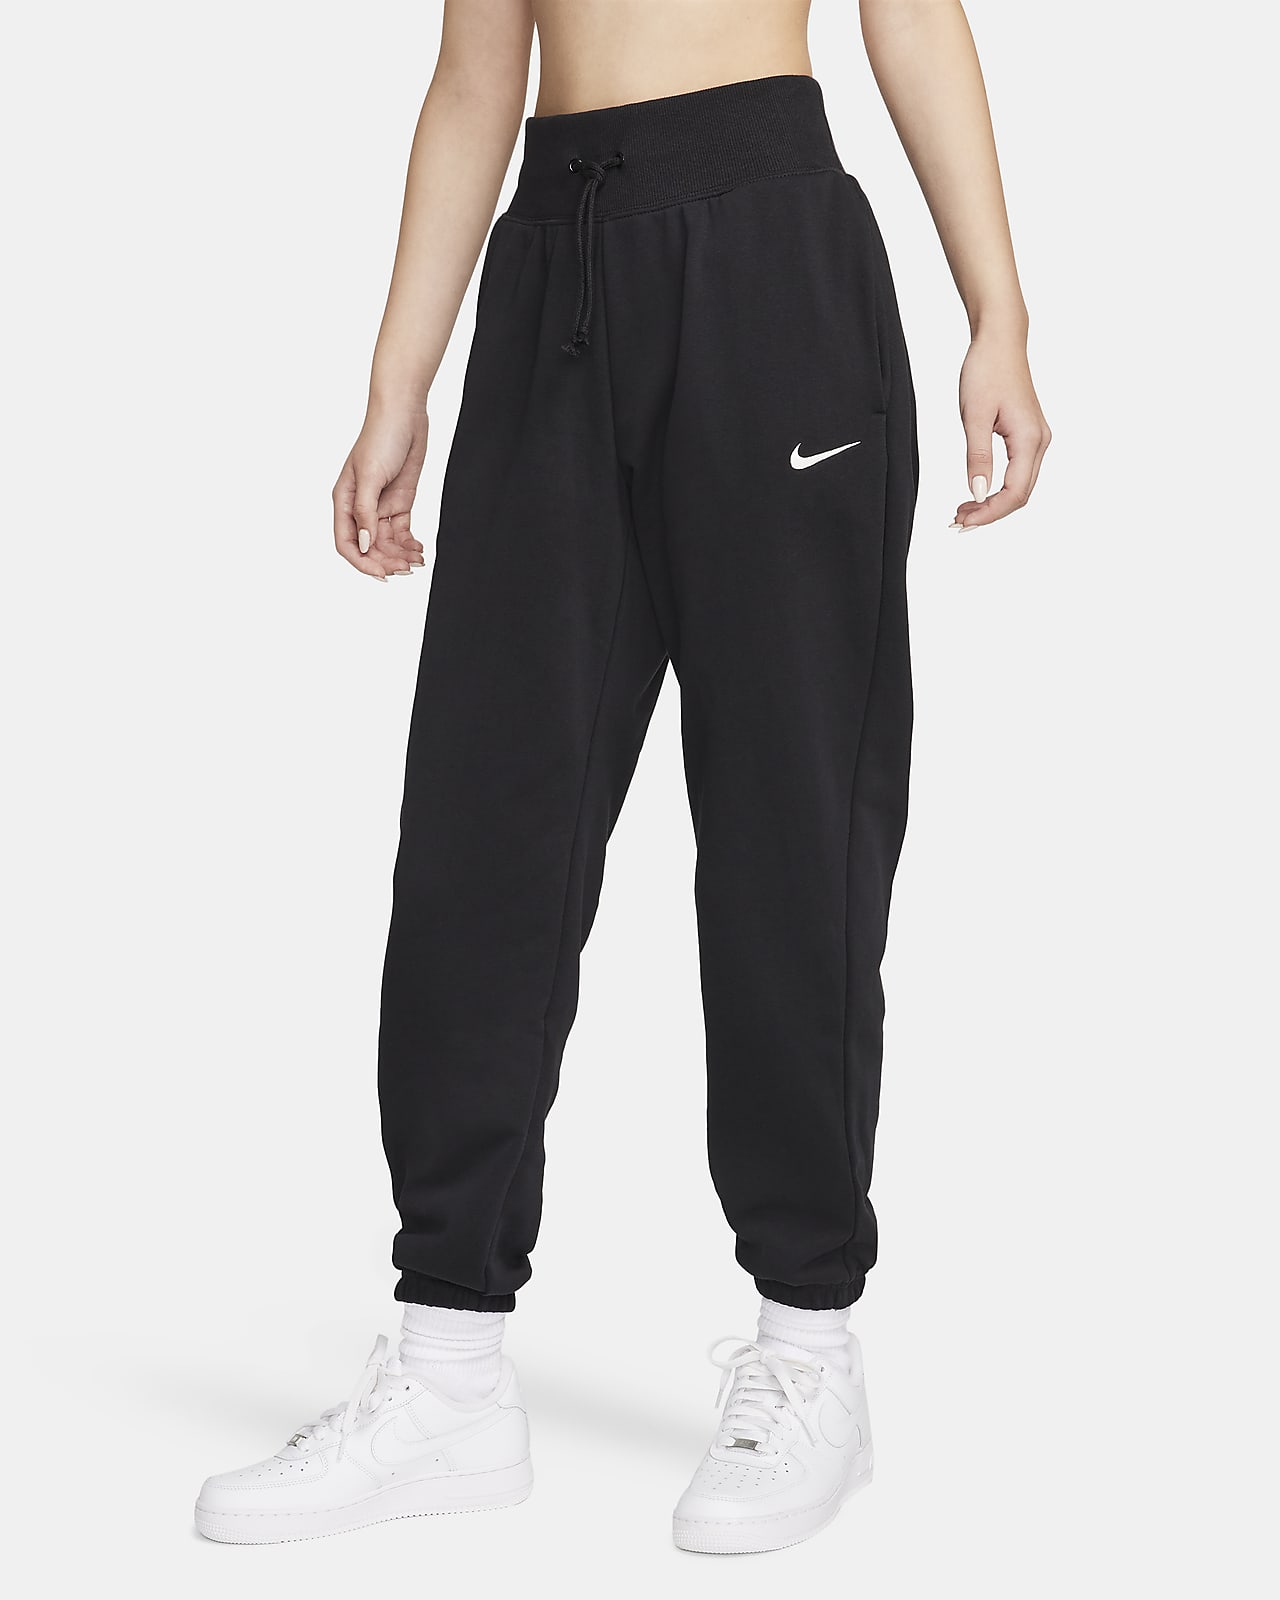 https://static.nike.com/a/images/t_PDP_1280_v1/f_auto,q_auto:eco/a2af2abc-2627-4eb2-ada9-0b549c444d80/sportswear-phoenix-fleece-high-waisted-oversized-french-terry-tracksuit-bottoms-hN114x.png